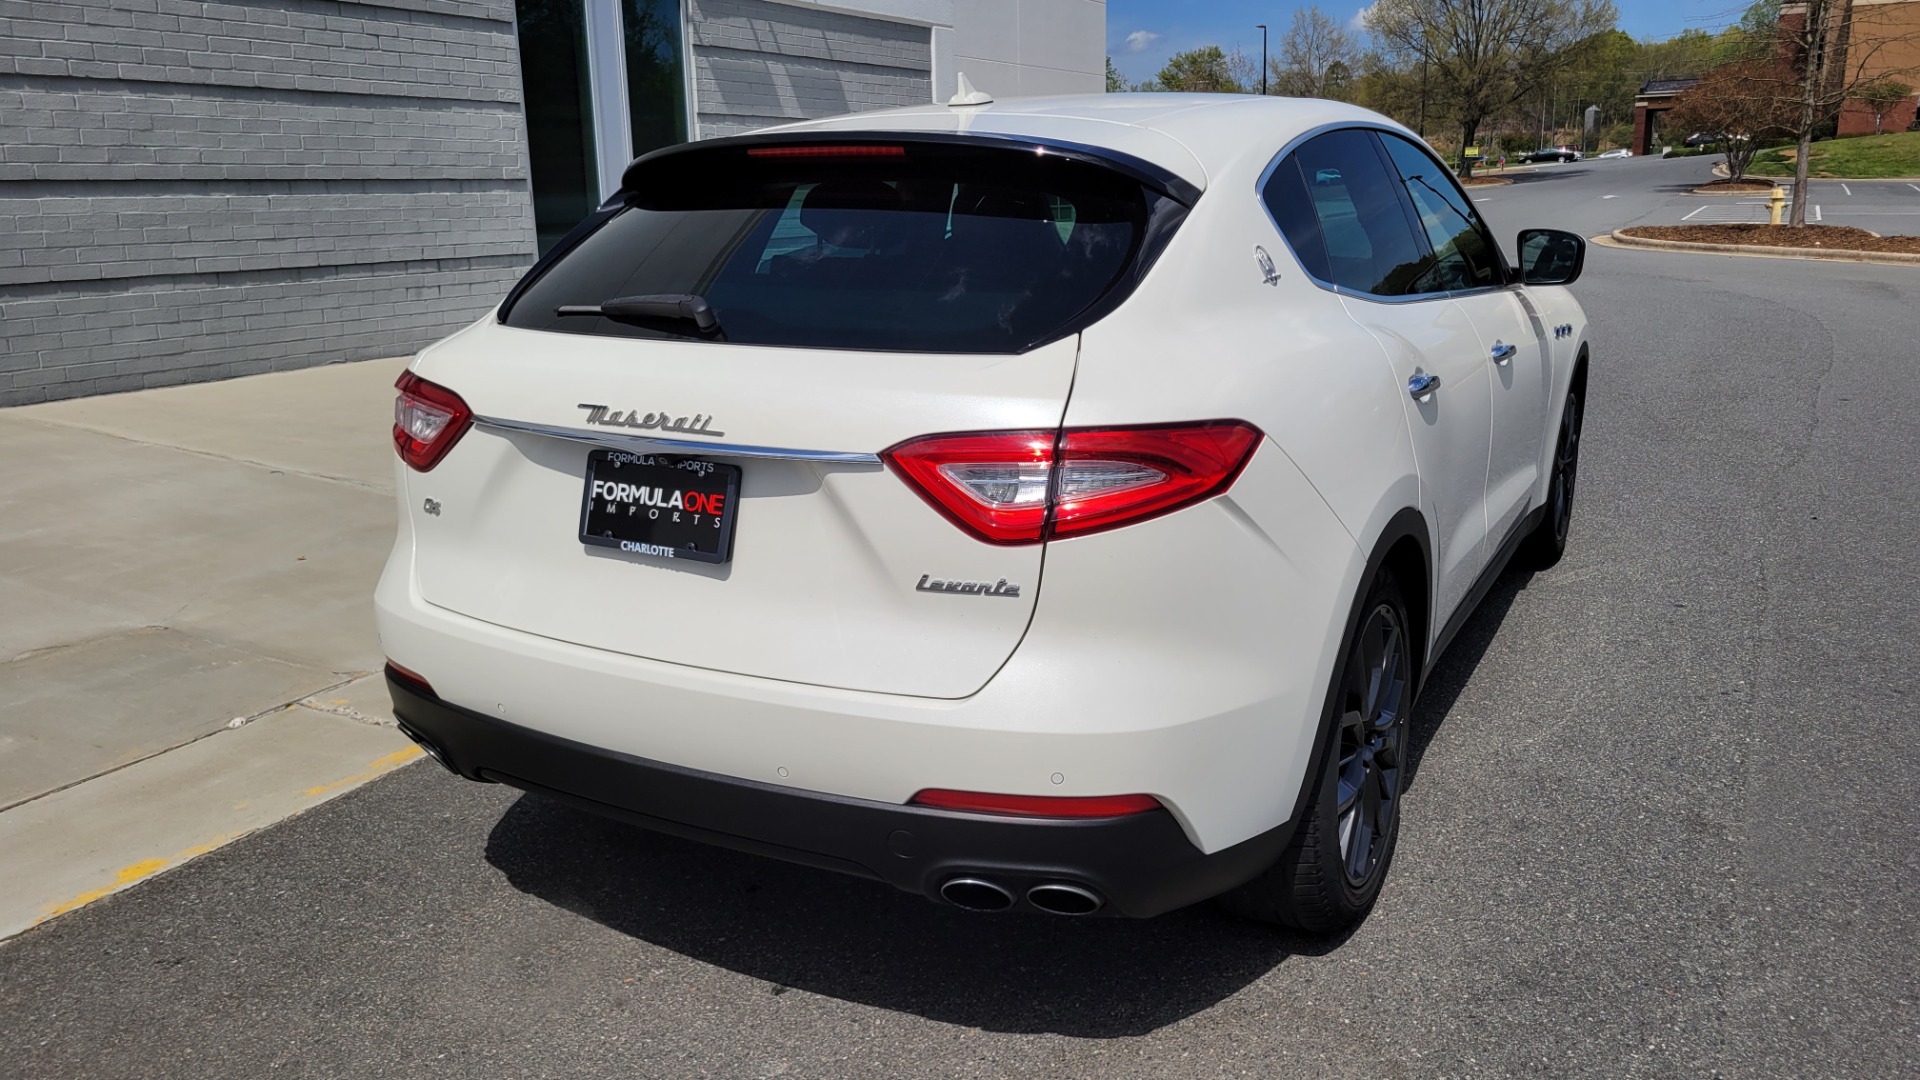 Used 2018 Maserati LEVANTE 3.0L 345HP SUV / 8-SPD / PREMIUM / BSA / NAV / 20IN WHLS / REARVIEW for sale $50,495 at Formula Imports in Charlotte NC 28227 9